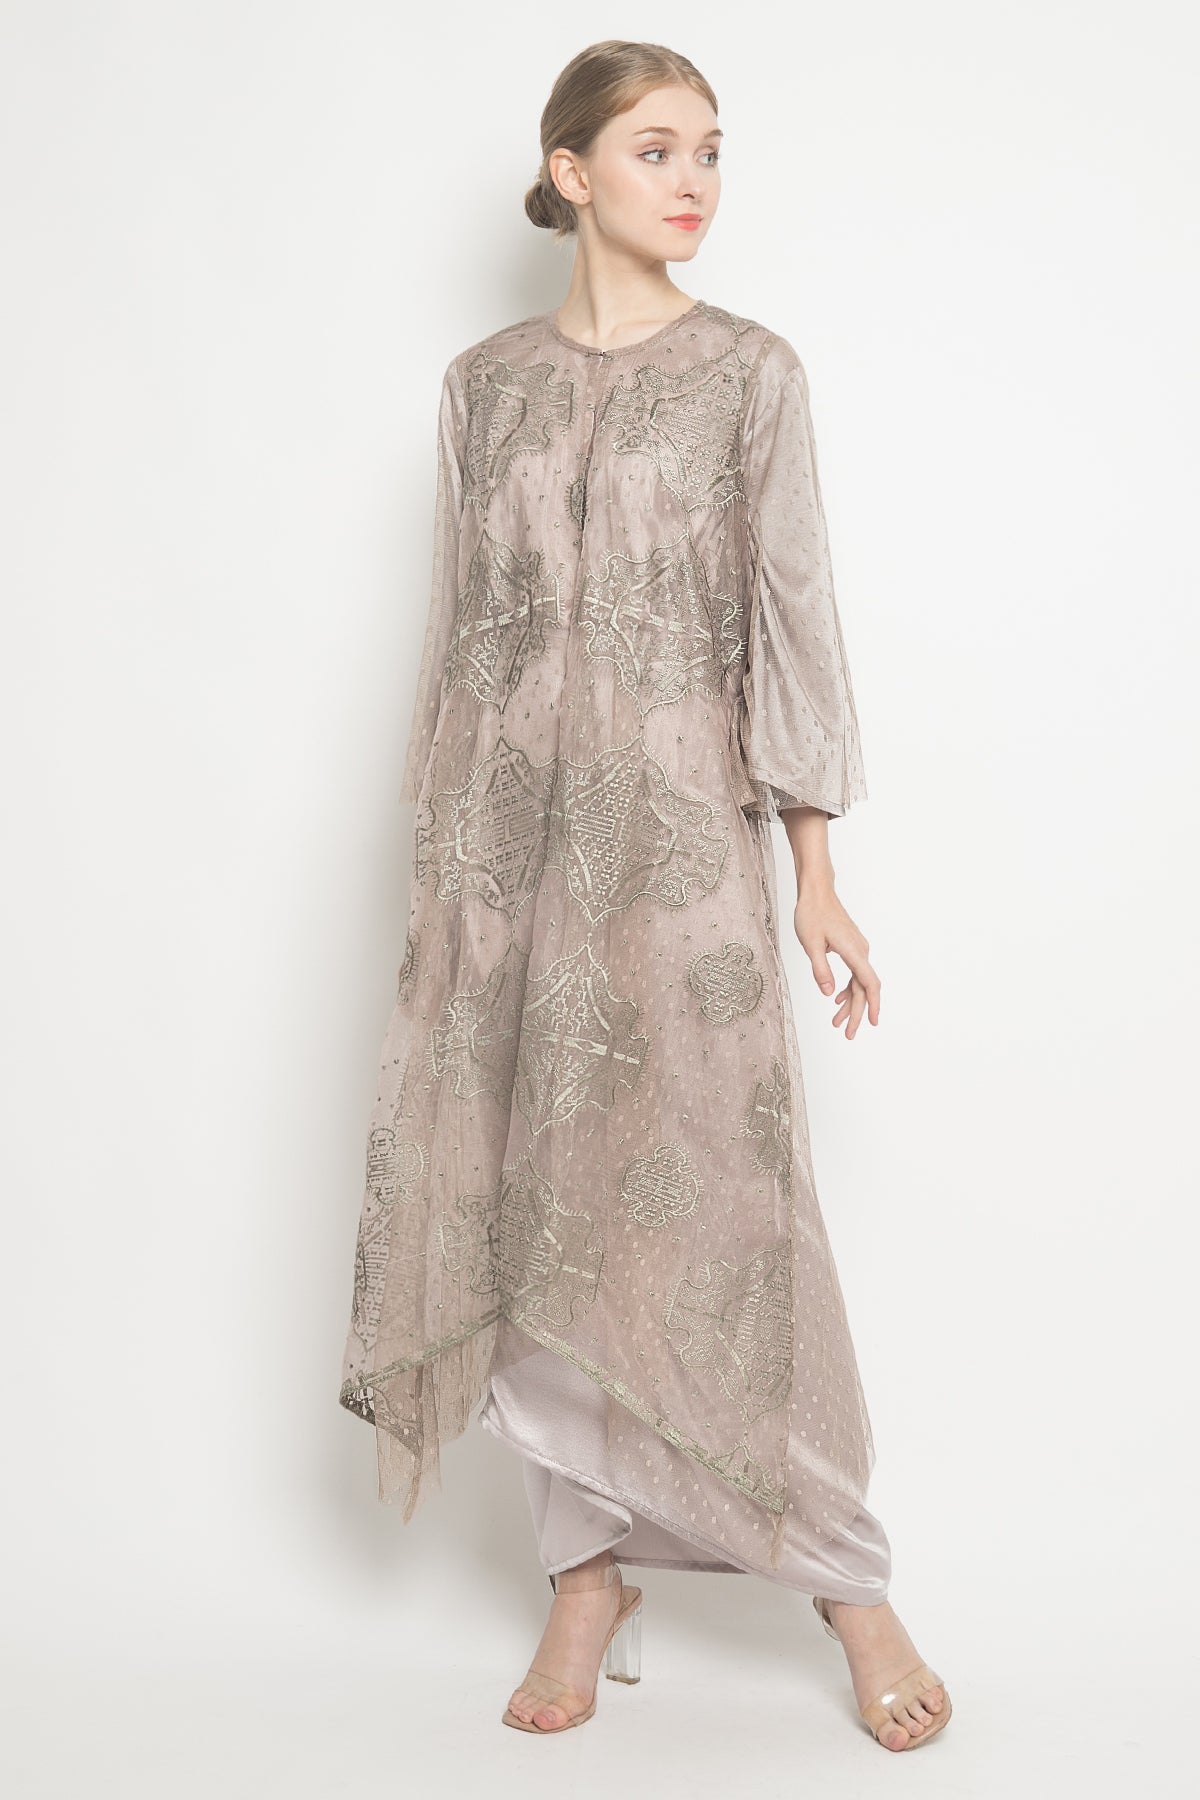 Alaia Dress in Olive Green and Brown